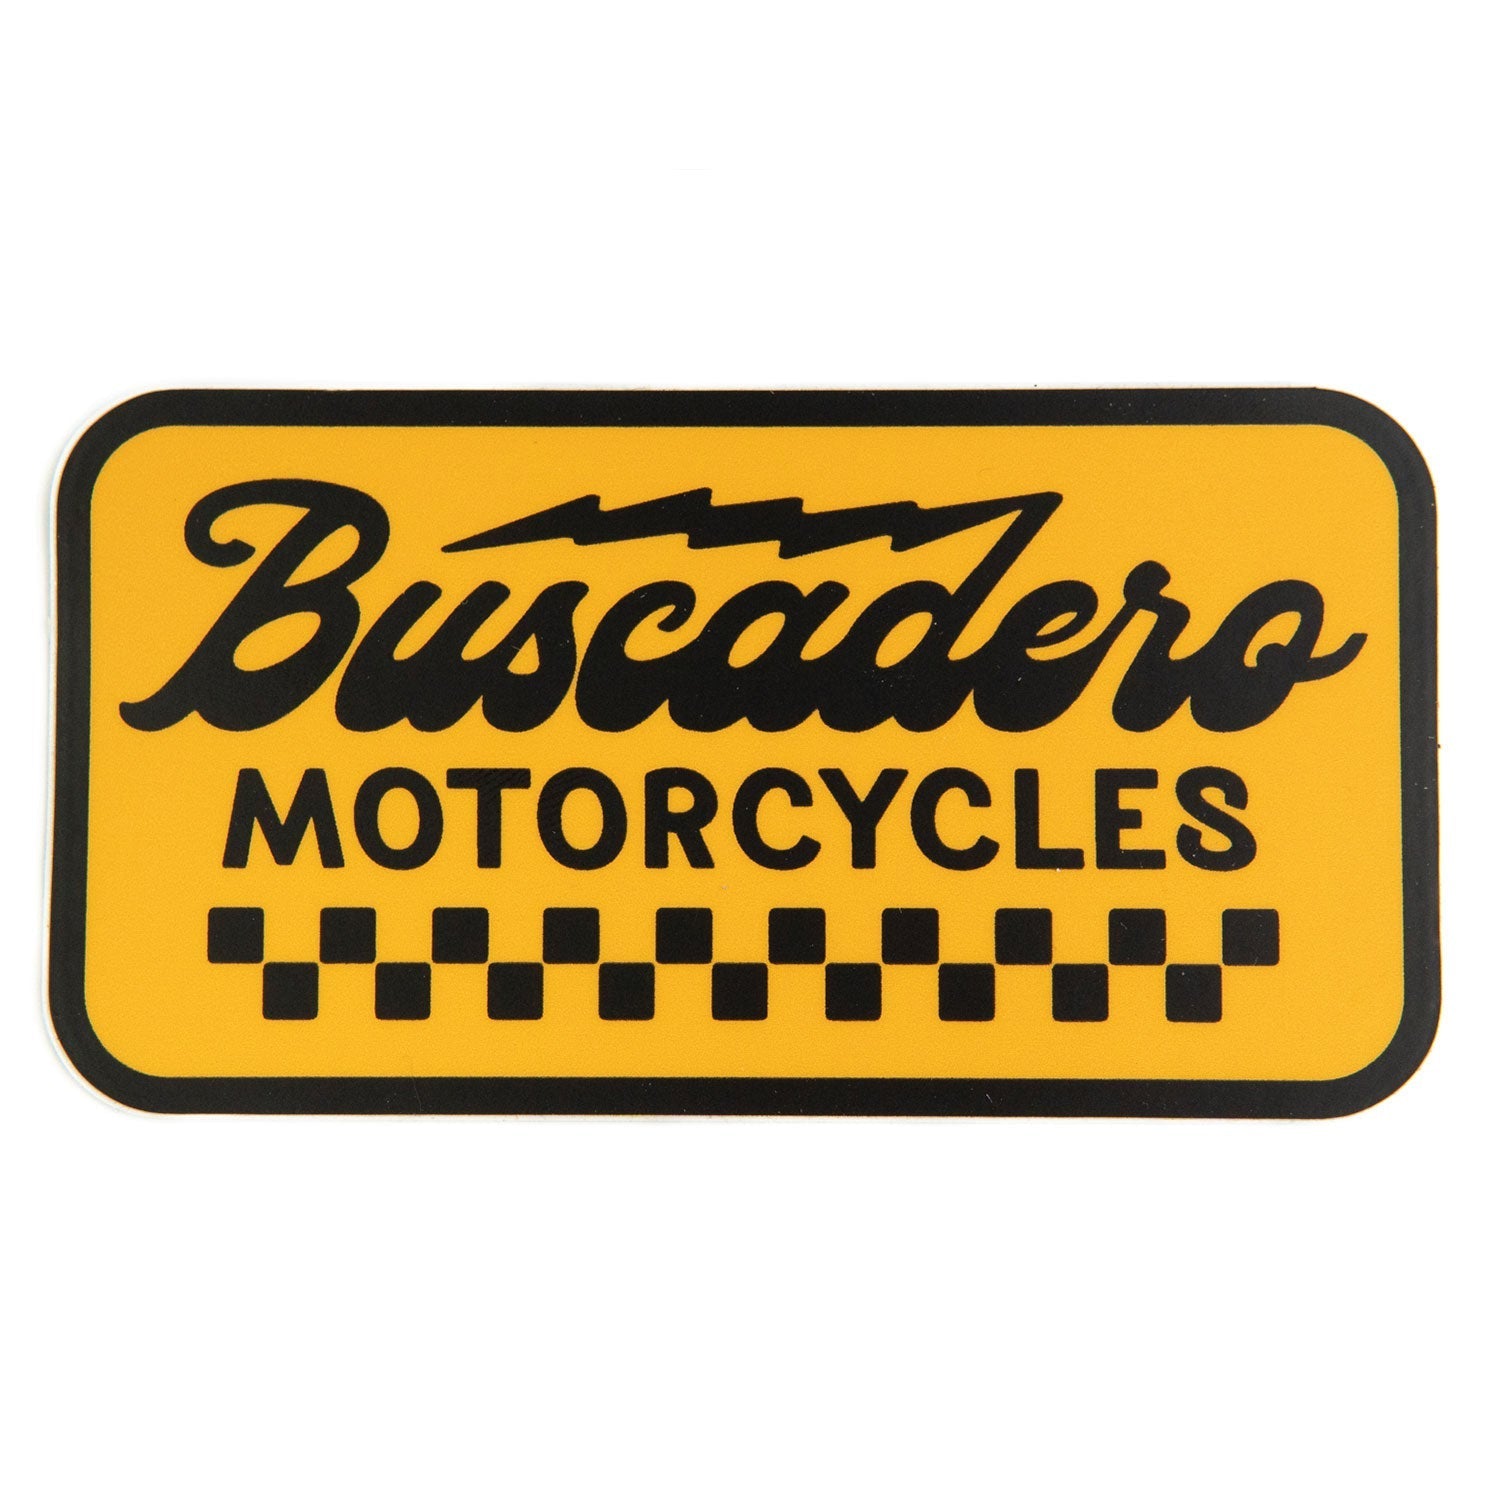 "Banner" signature decal - Buscadero Motorcycles